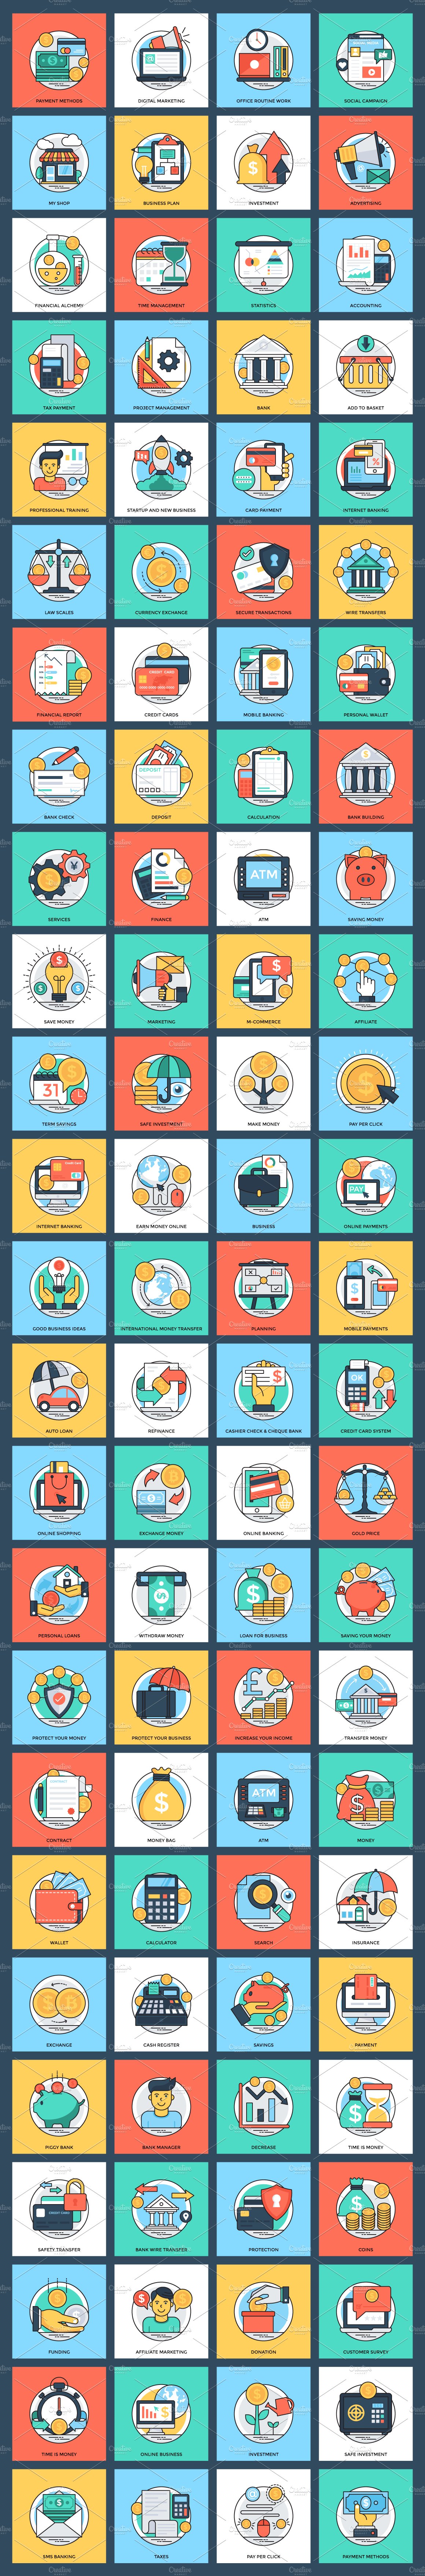 100 Flat Banking and Finance Icons preview image.